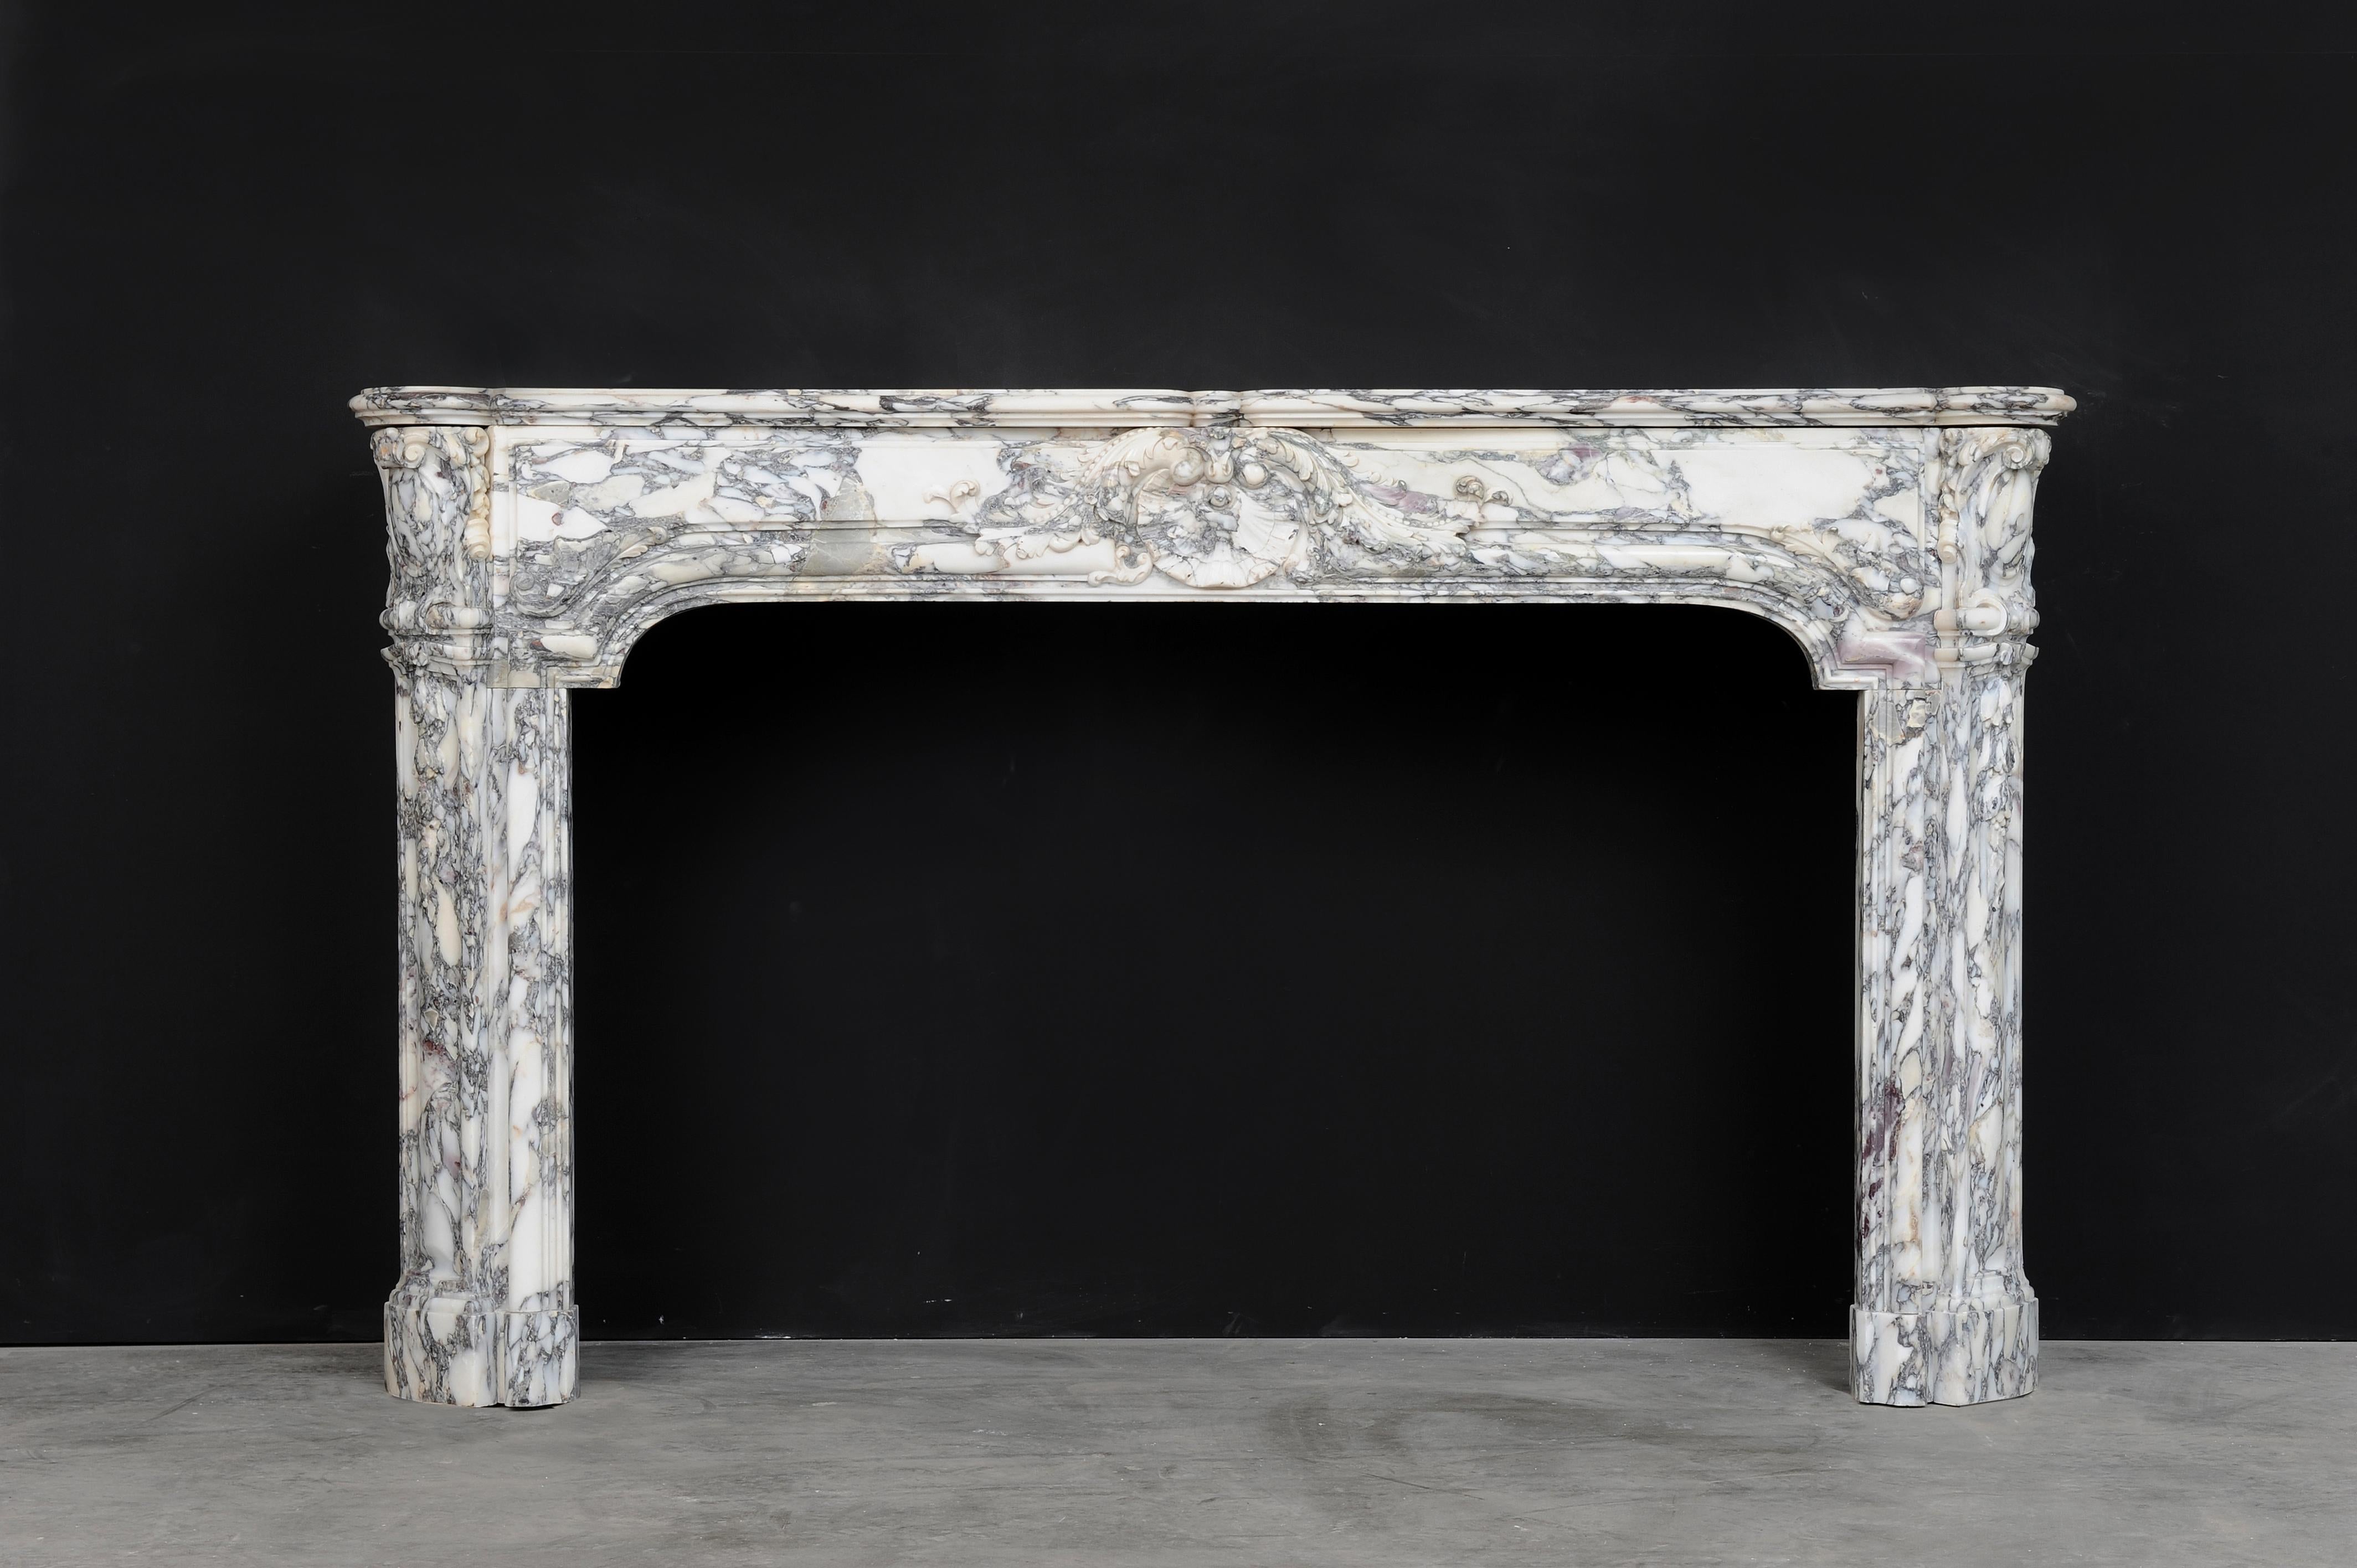 Its a pleasure to offer this wonderful French fireplace in beautiful Italian Breche (Breccia) marble.
This early 19th century transitional (XIV - XV) mantel shows a great variety of floral decorations though out.

Superb arched, paneled freeze with